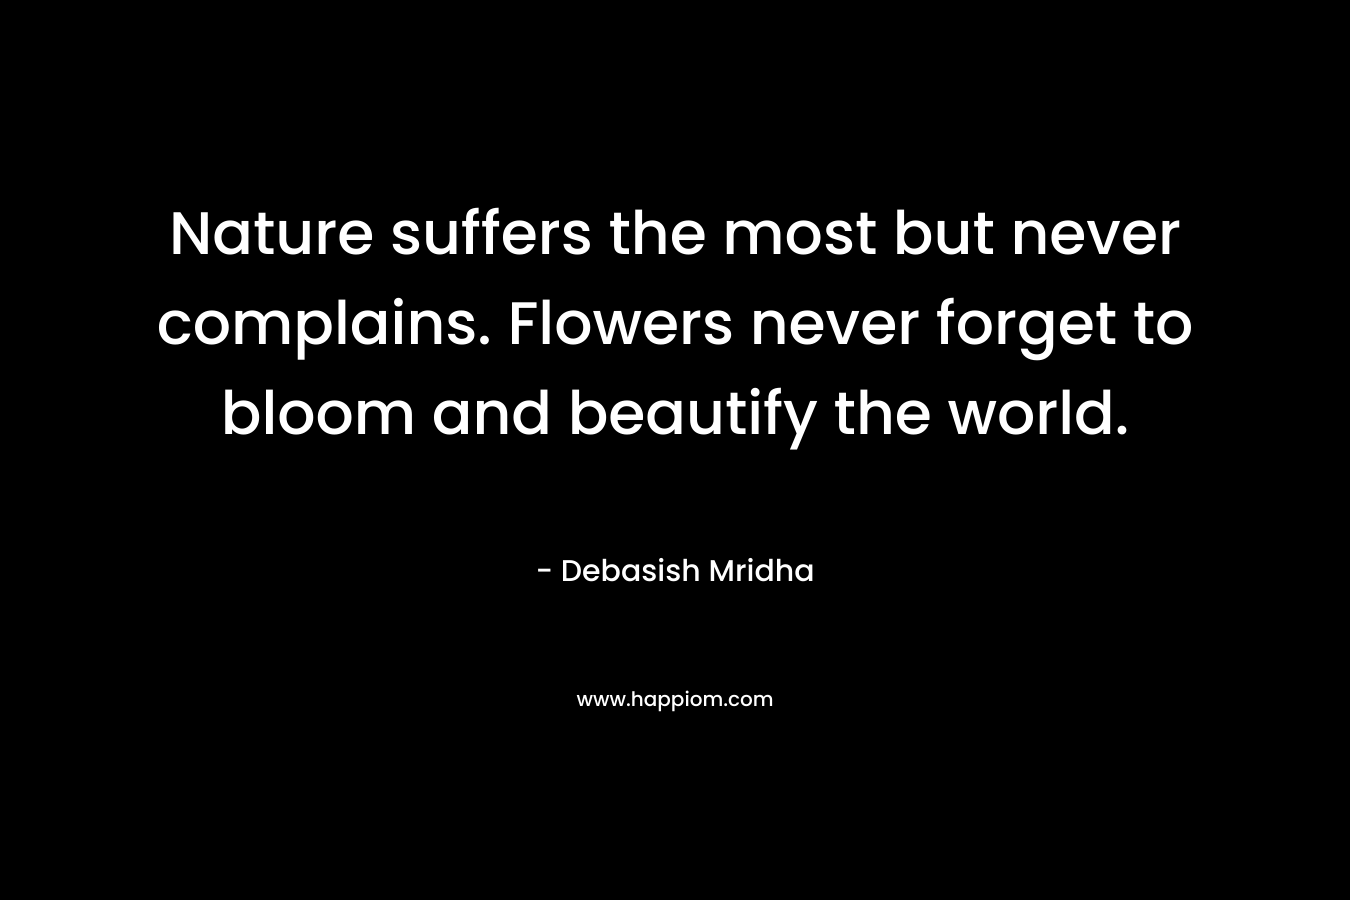 Nature suffers the most but never complains. Flowers never forget to bloom and beautify the world. – Debasish Mridha